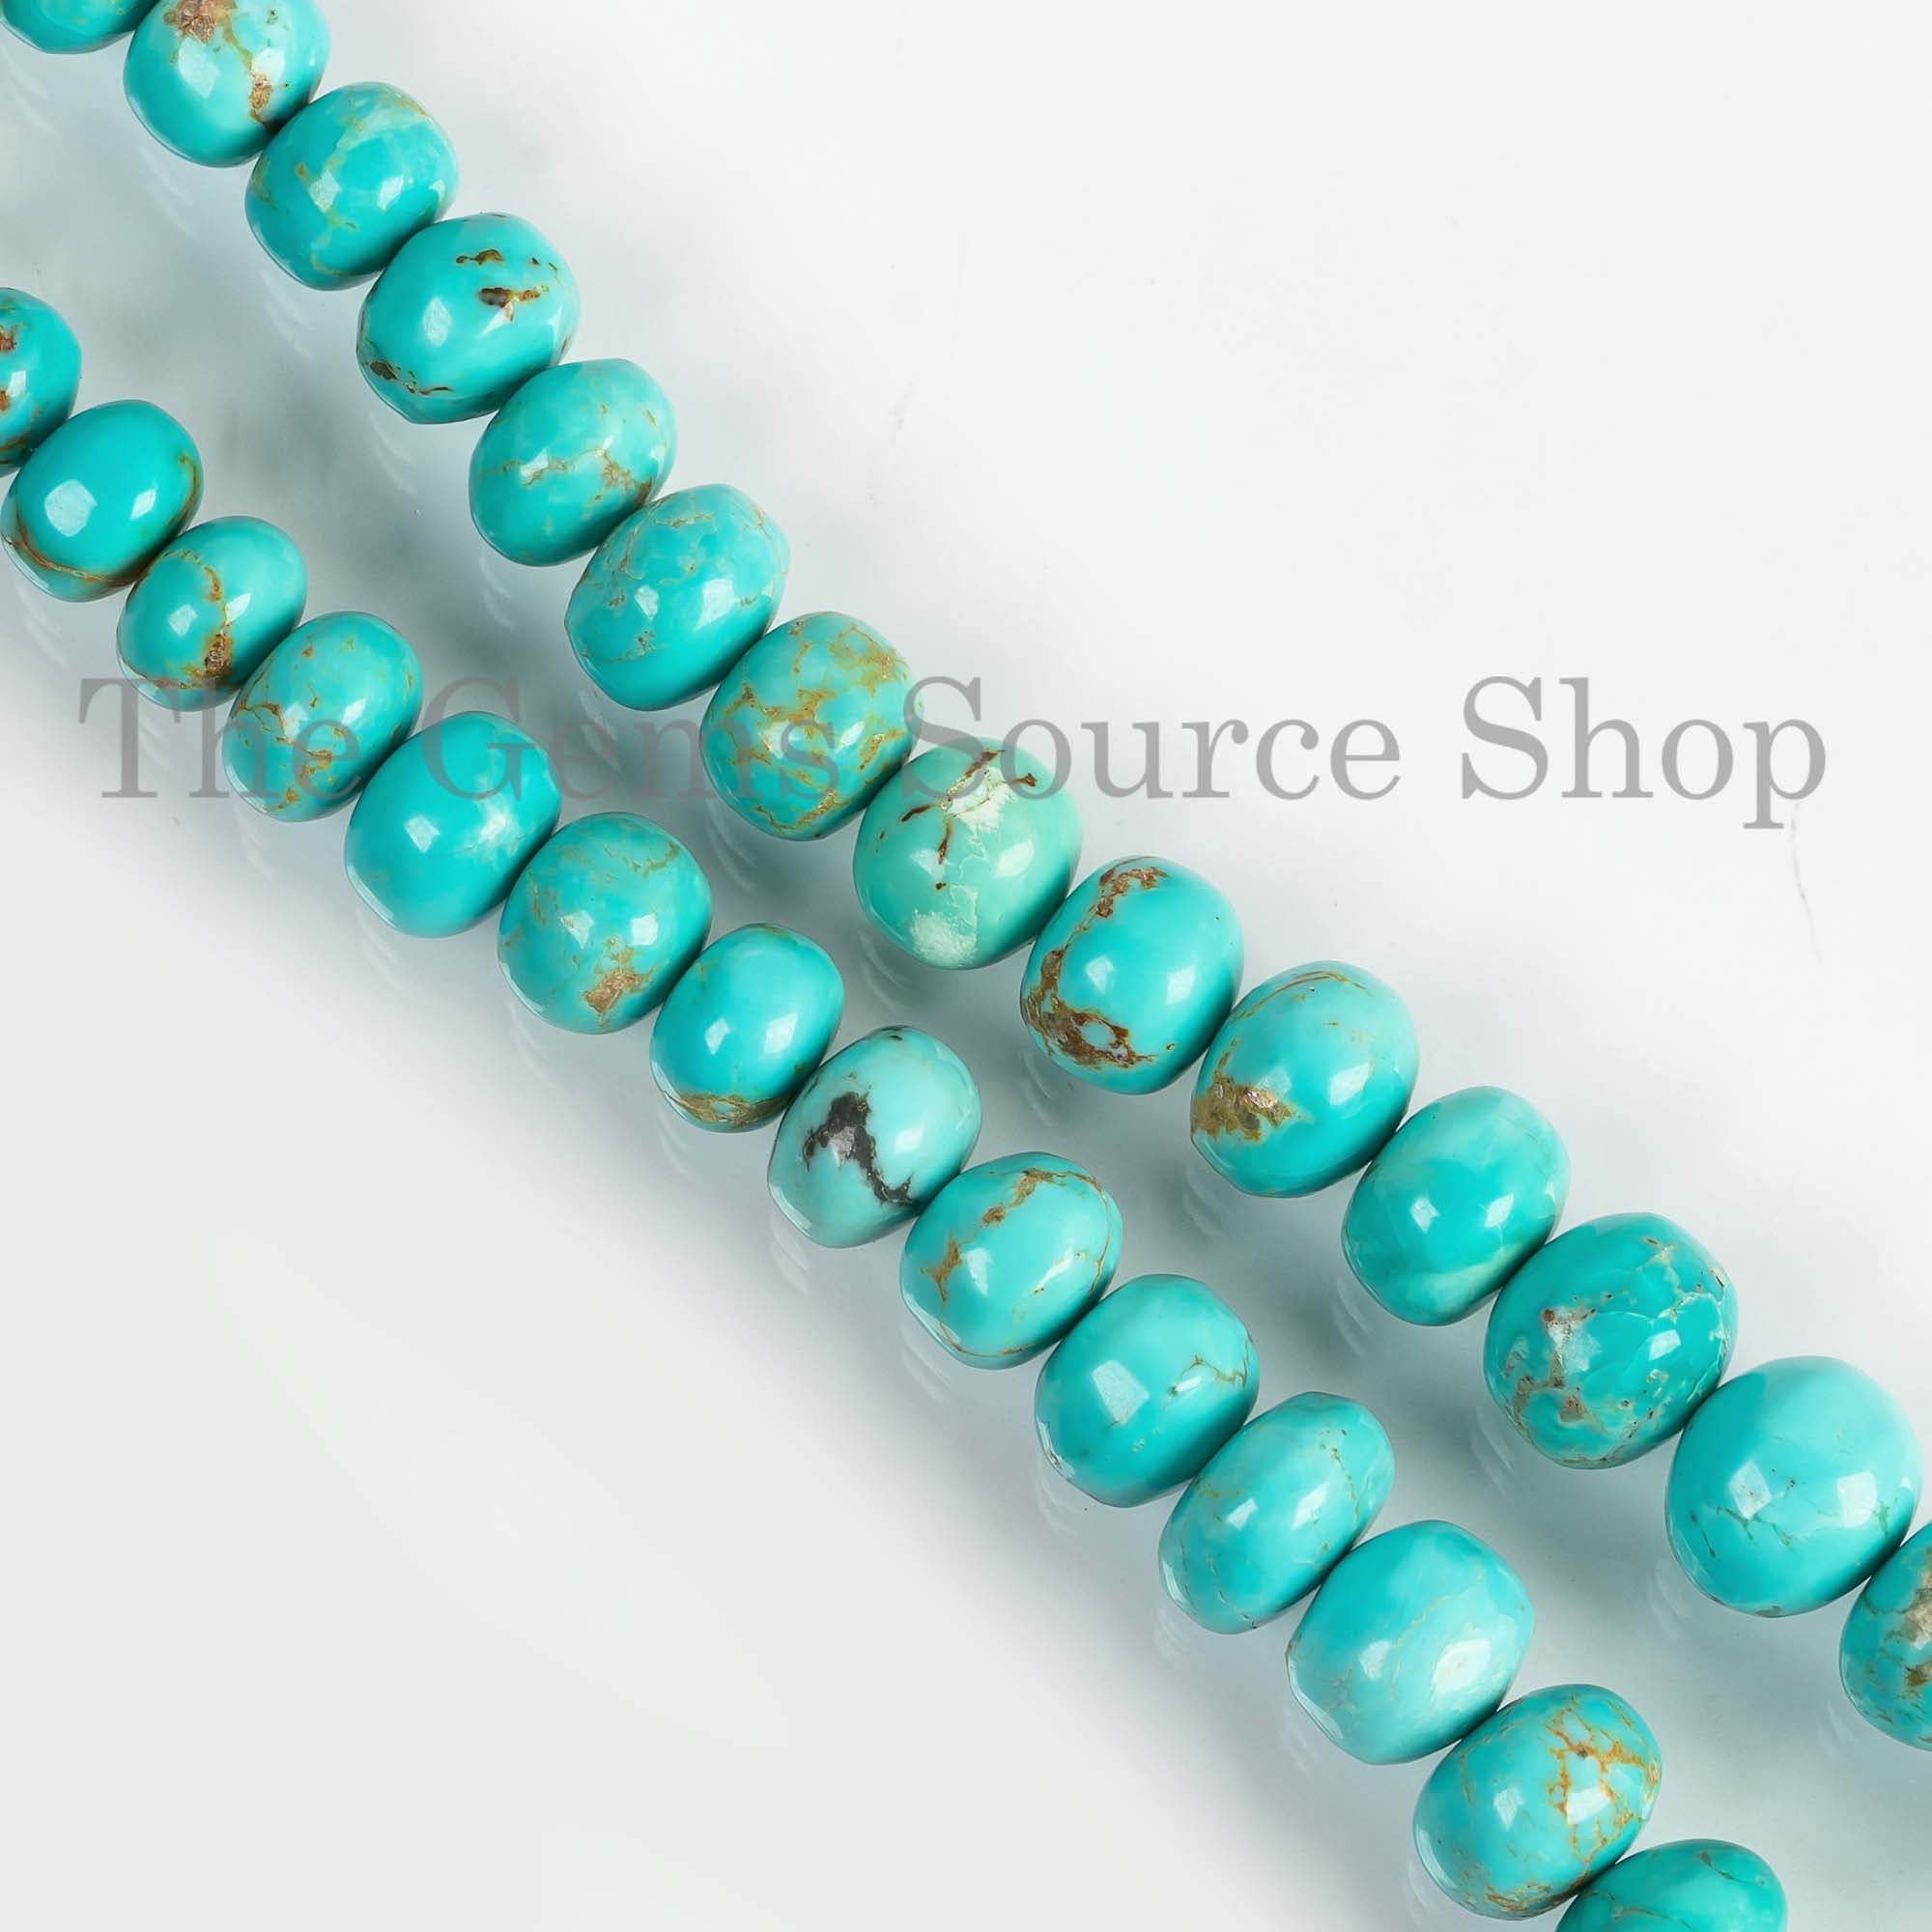 8-13 mm Natural Turquoise Beads, Smooth Rondelle Beads, Plain Turquoise Strand, Jewelry Making Beads